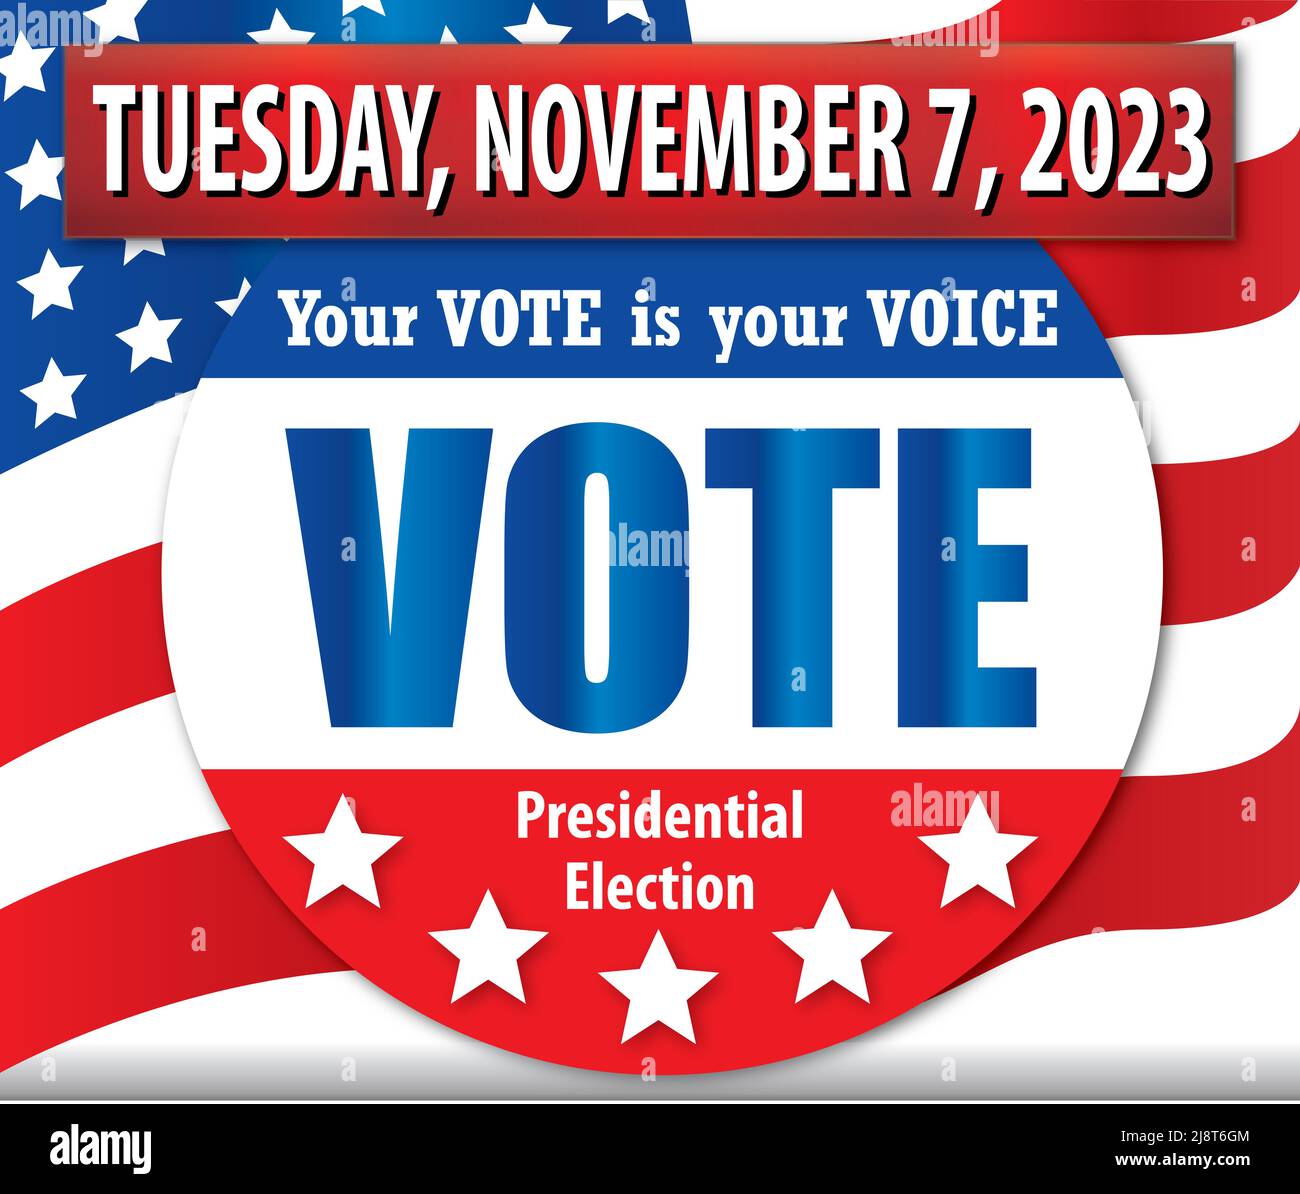 Vote on Election Day 2023 Presidential Election November 7 2023 Stock